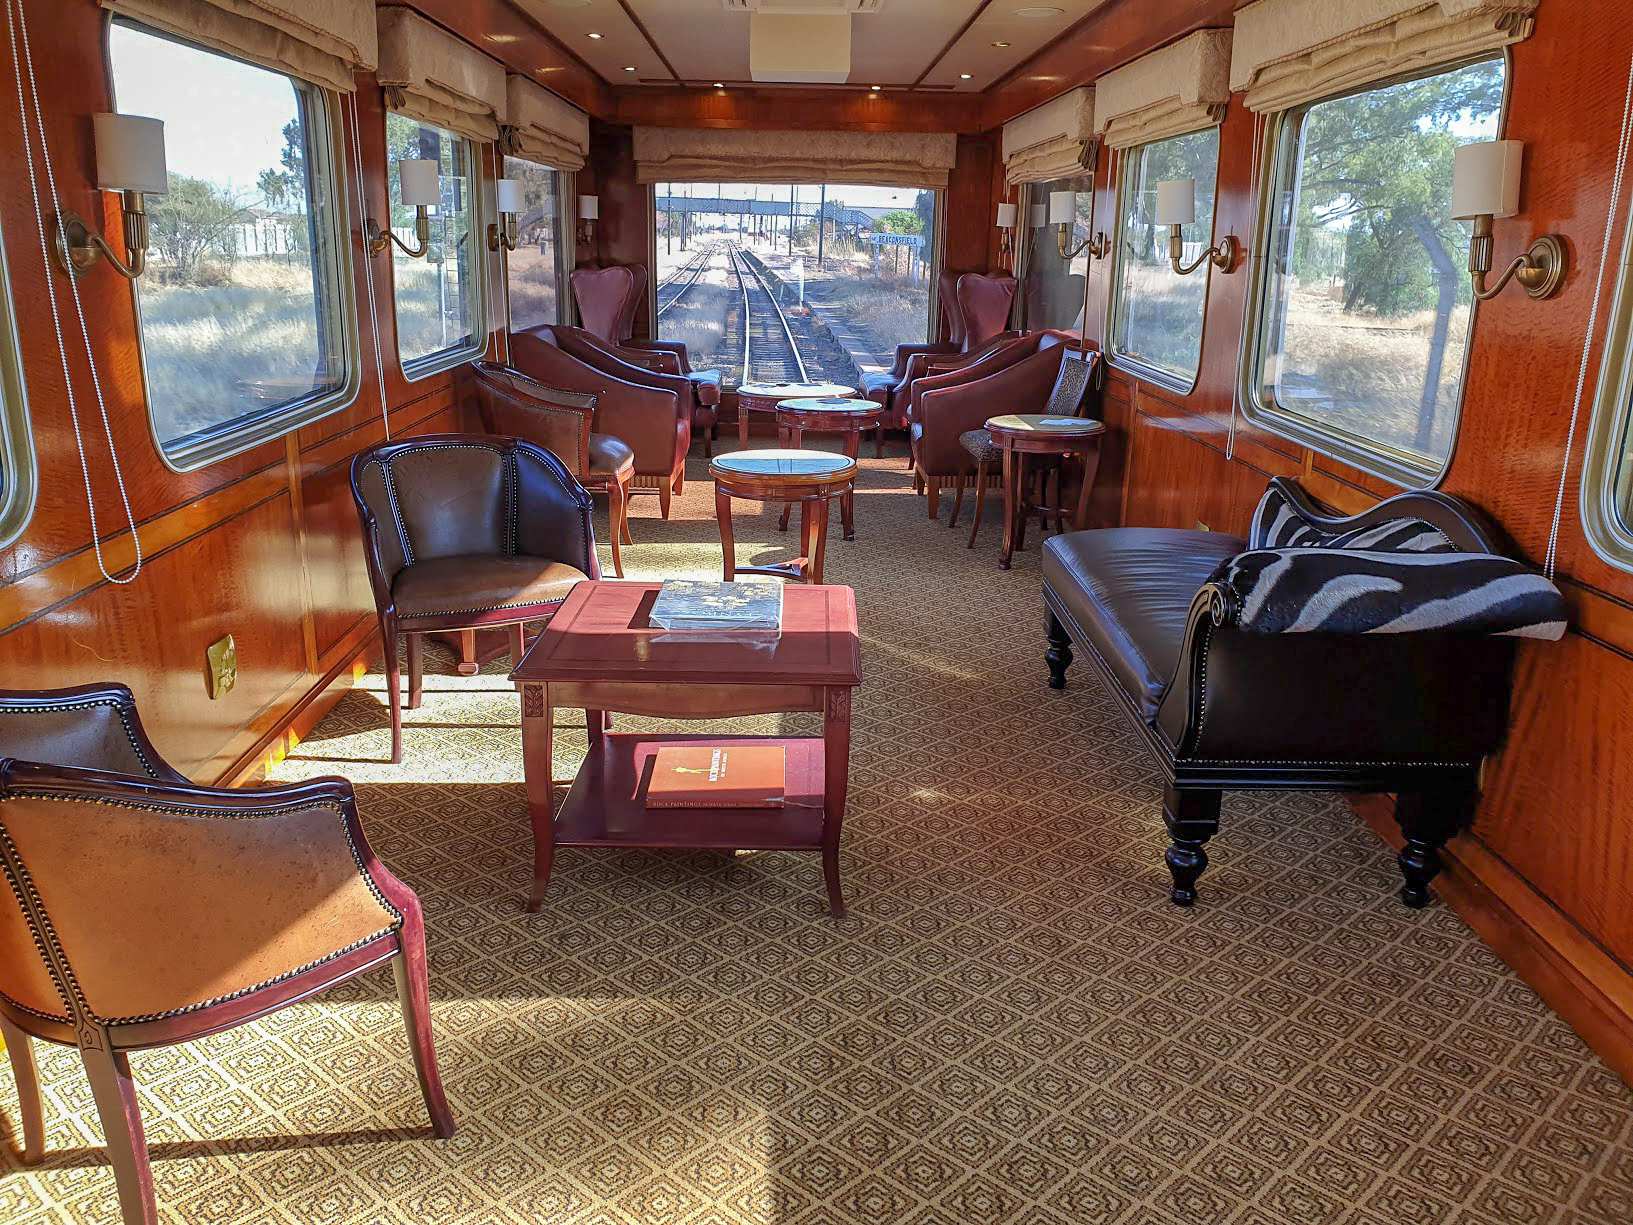 The Observation Car on The Blue Train